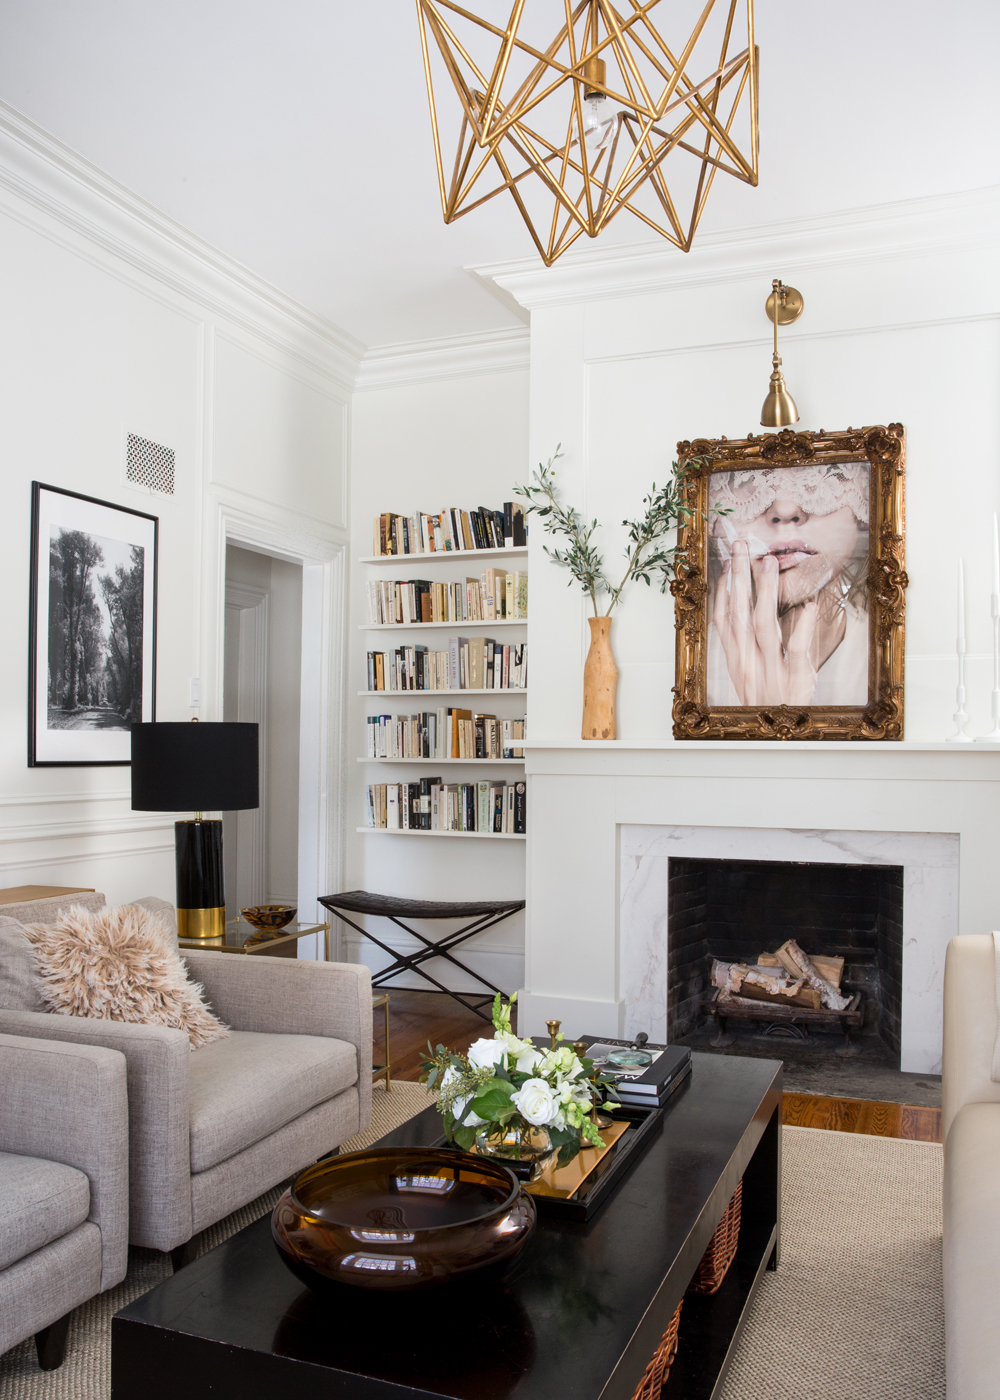 Parisian-inspired living room design with stylish fireplace mantel.